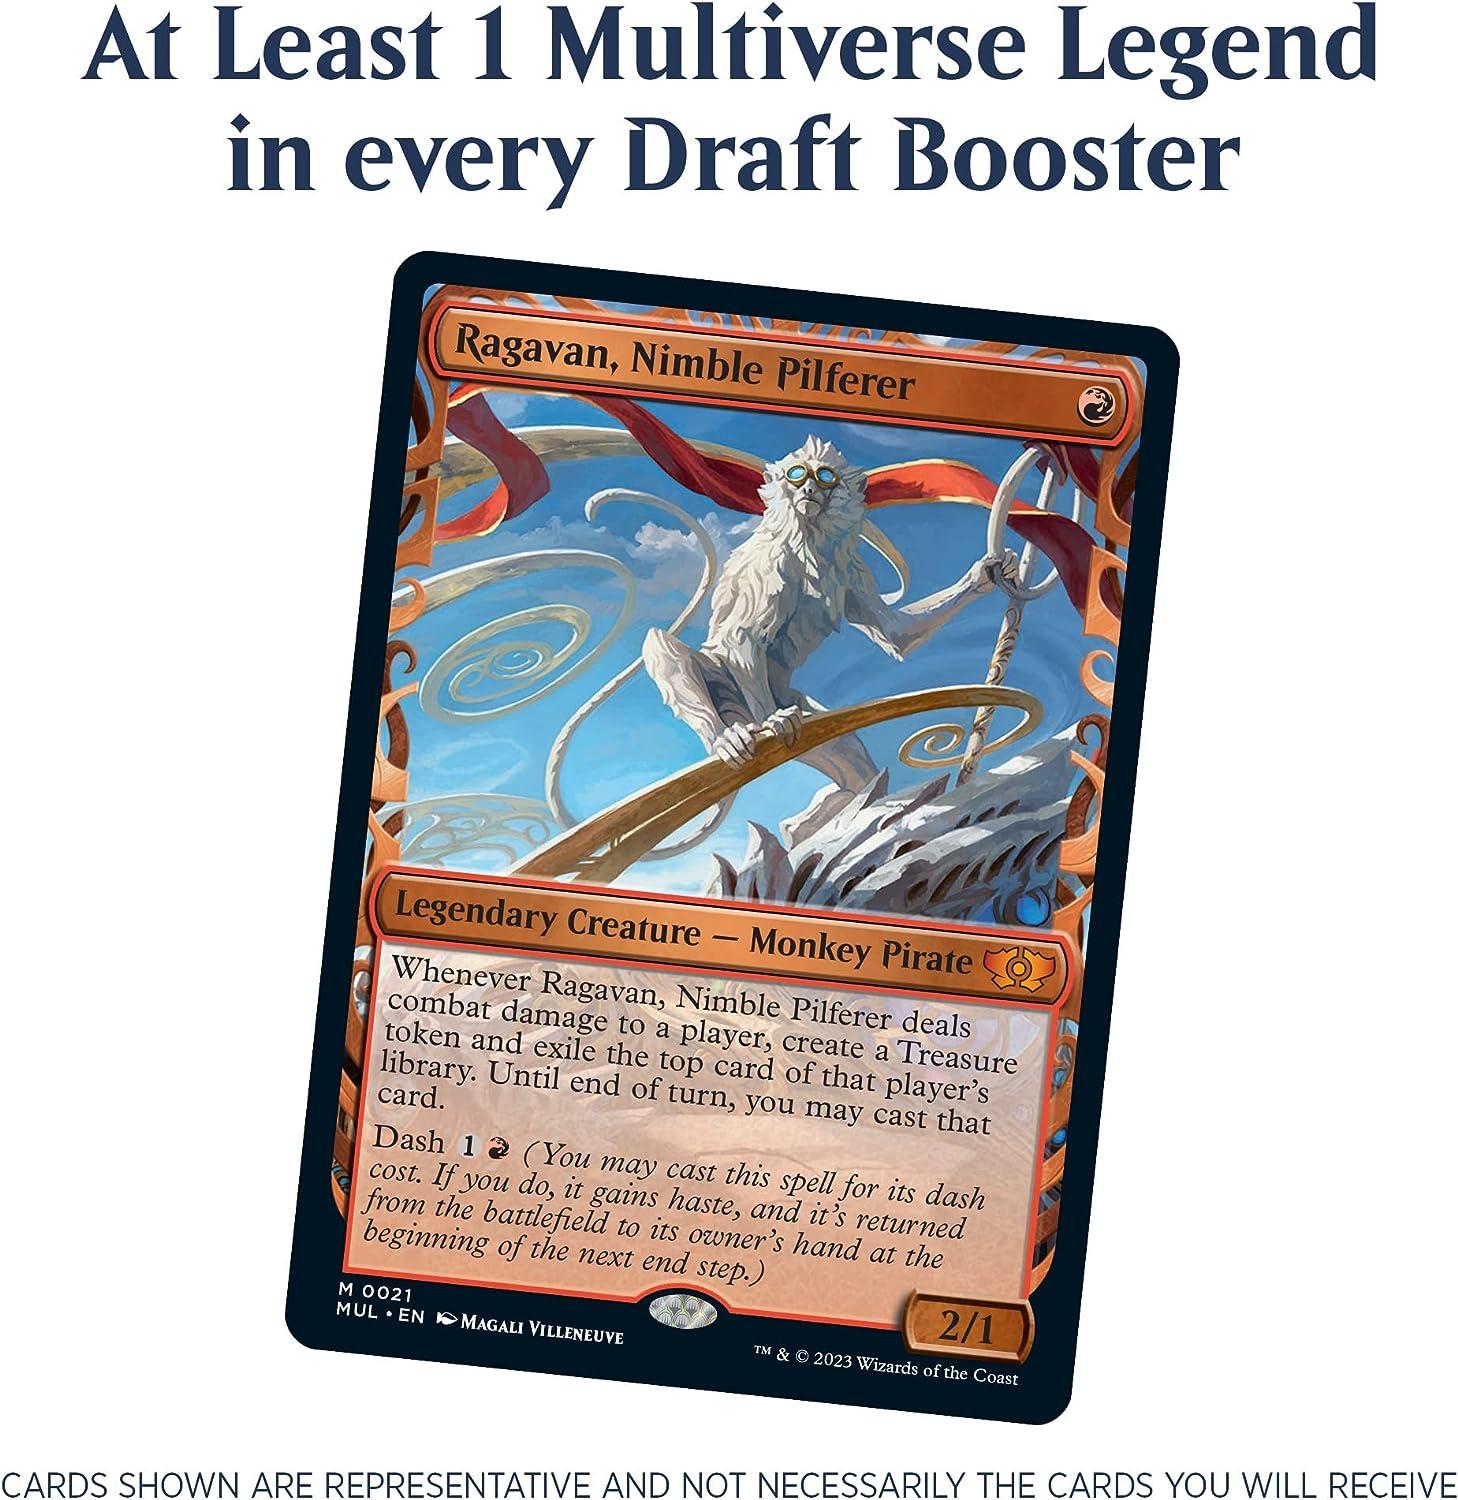 Wizards of the Coast Magic: The Gathering March of the Machine Draft Booster